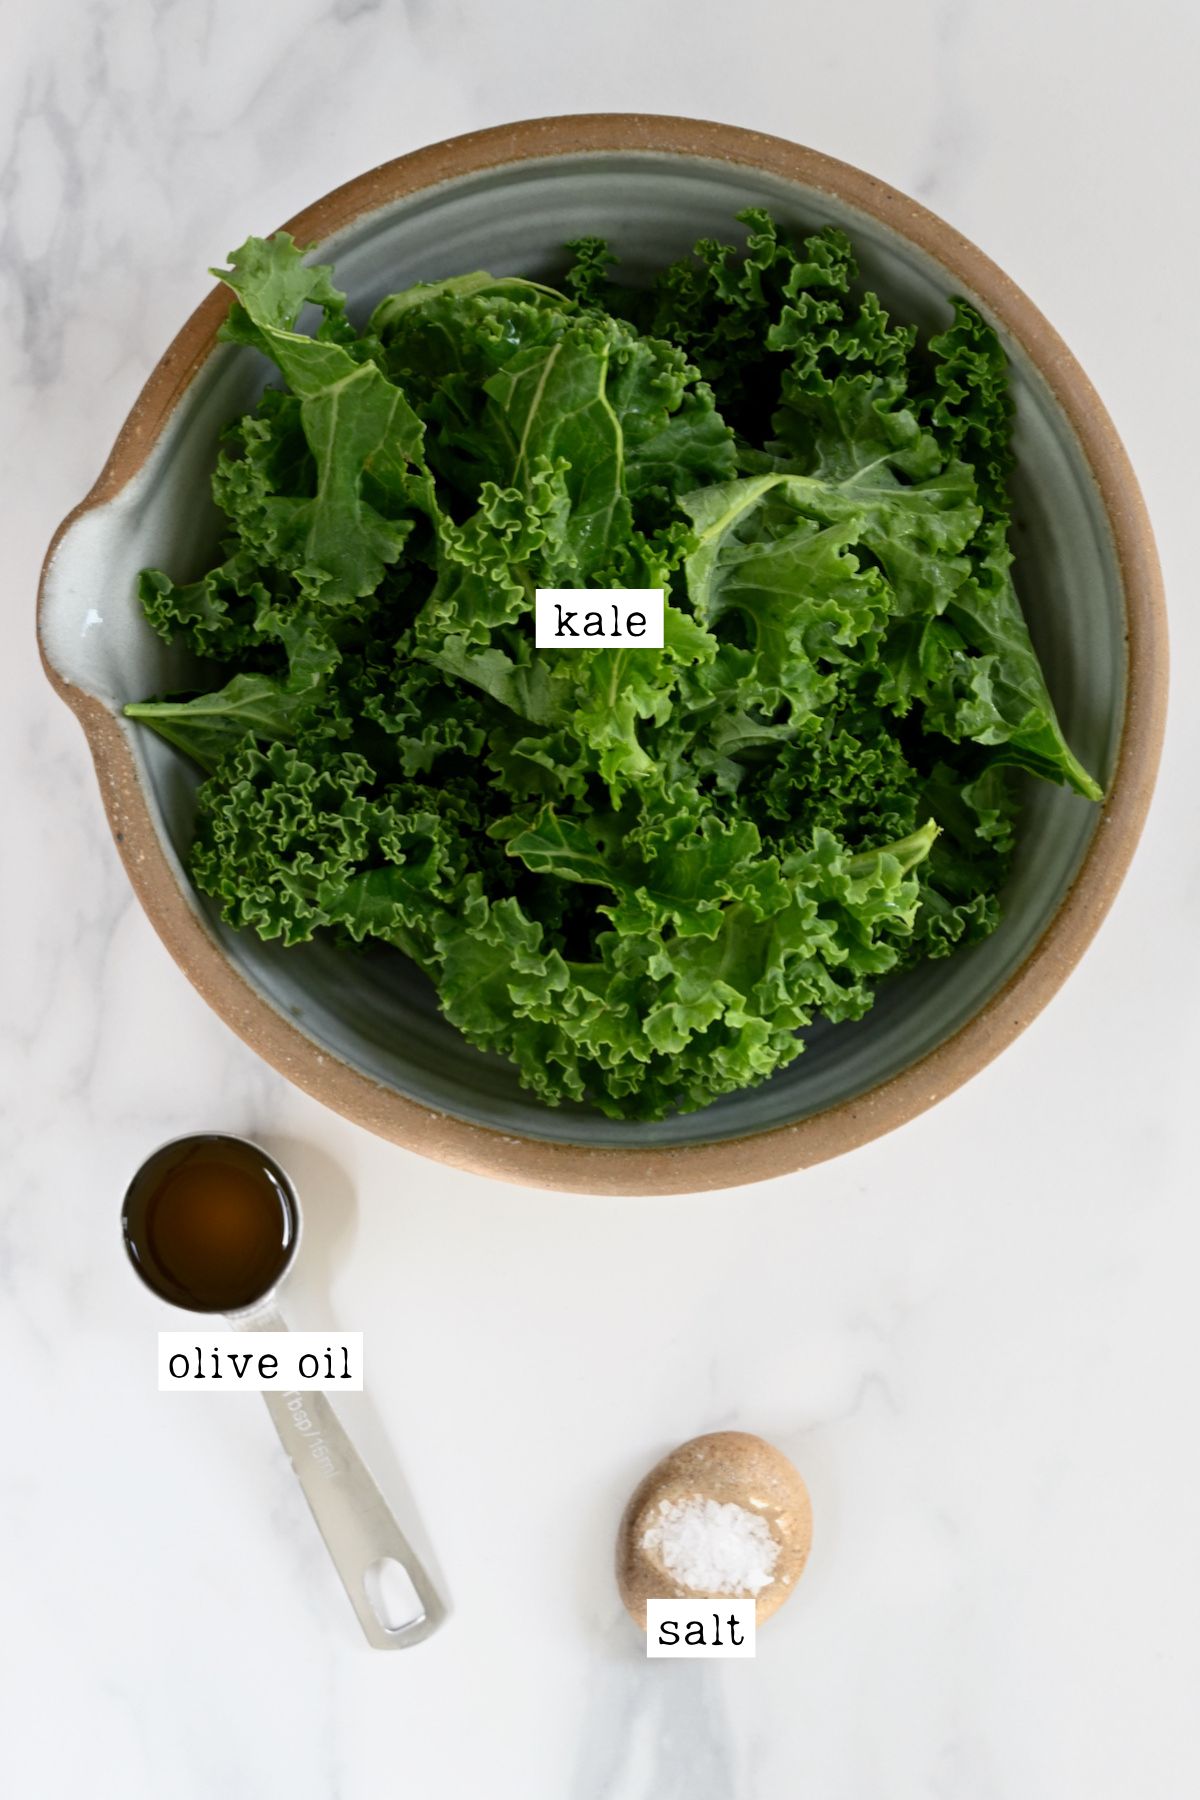 Ingredients for kale chips